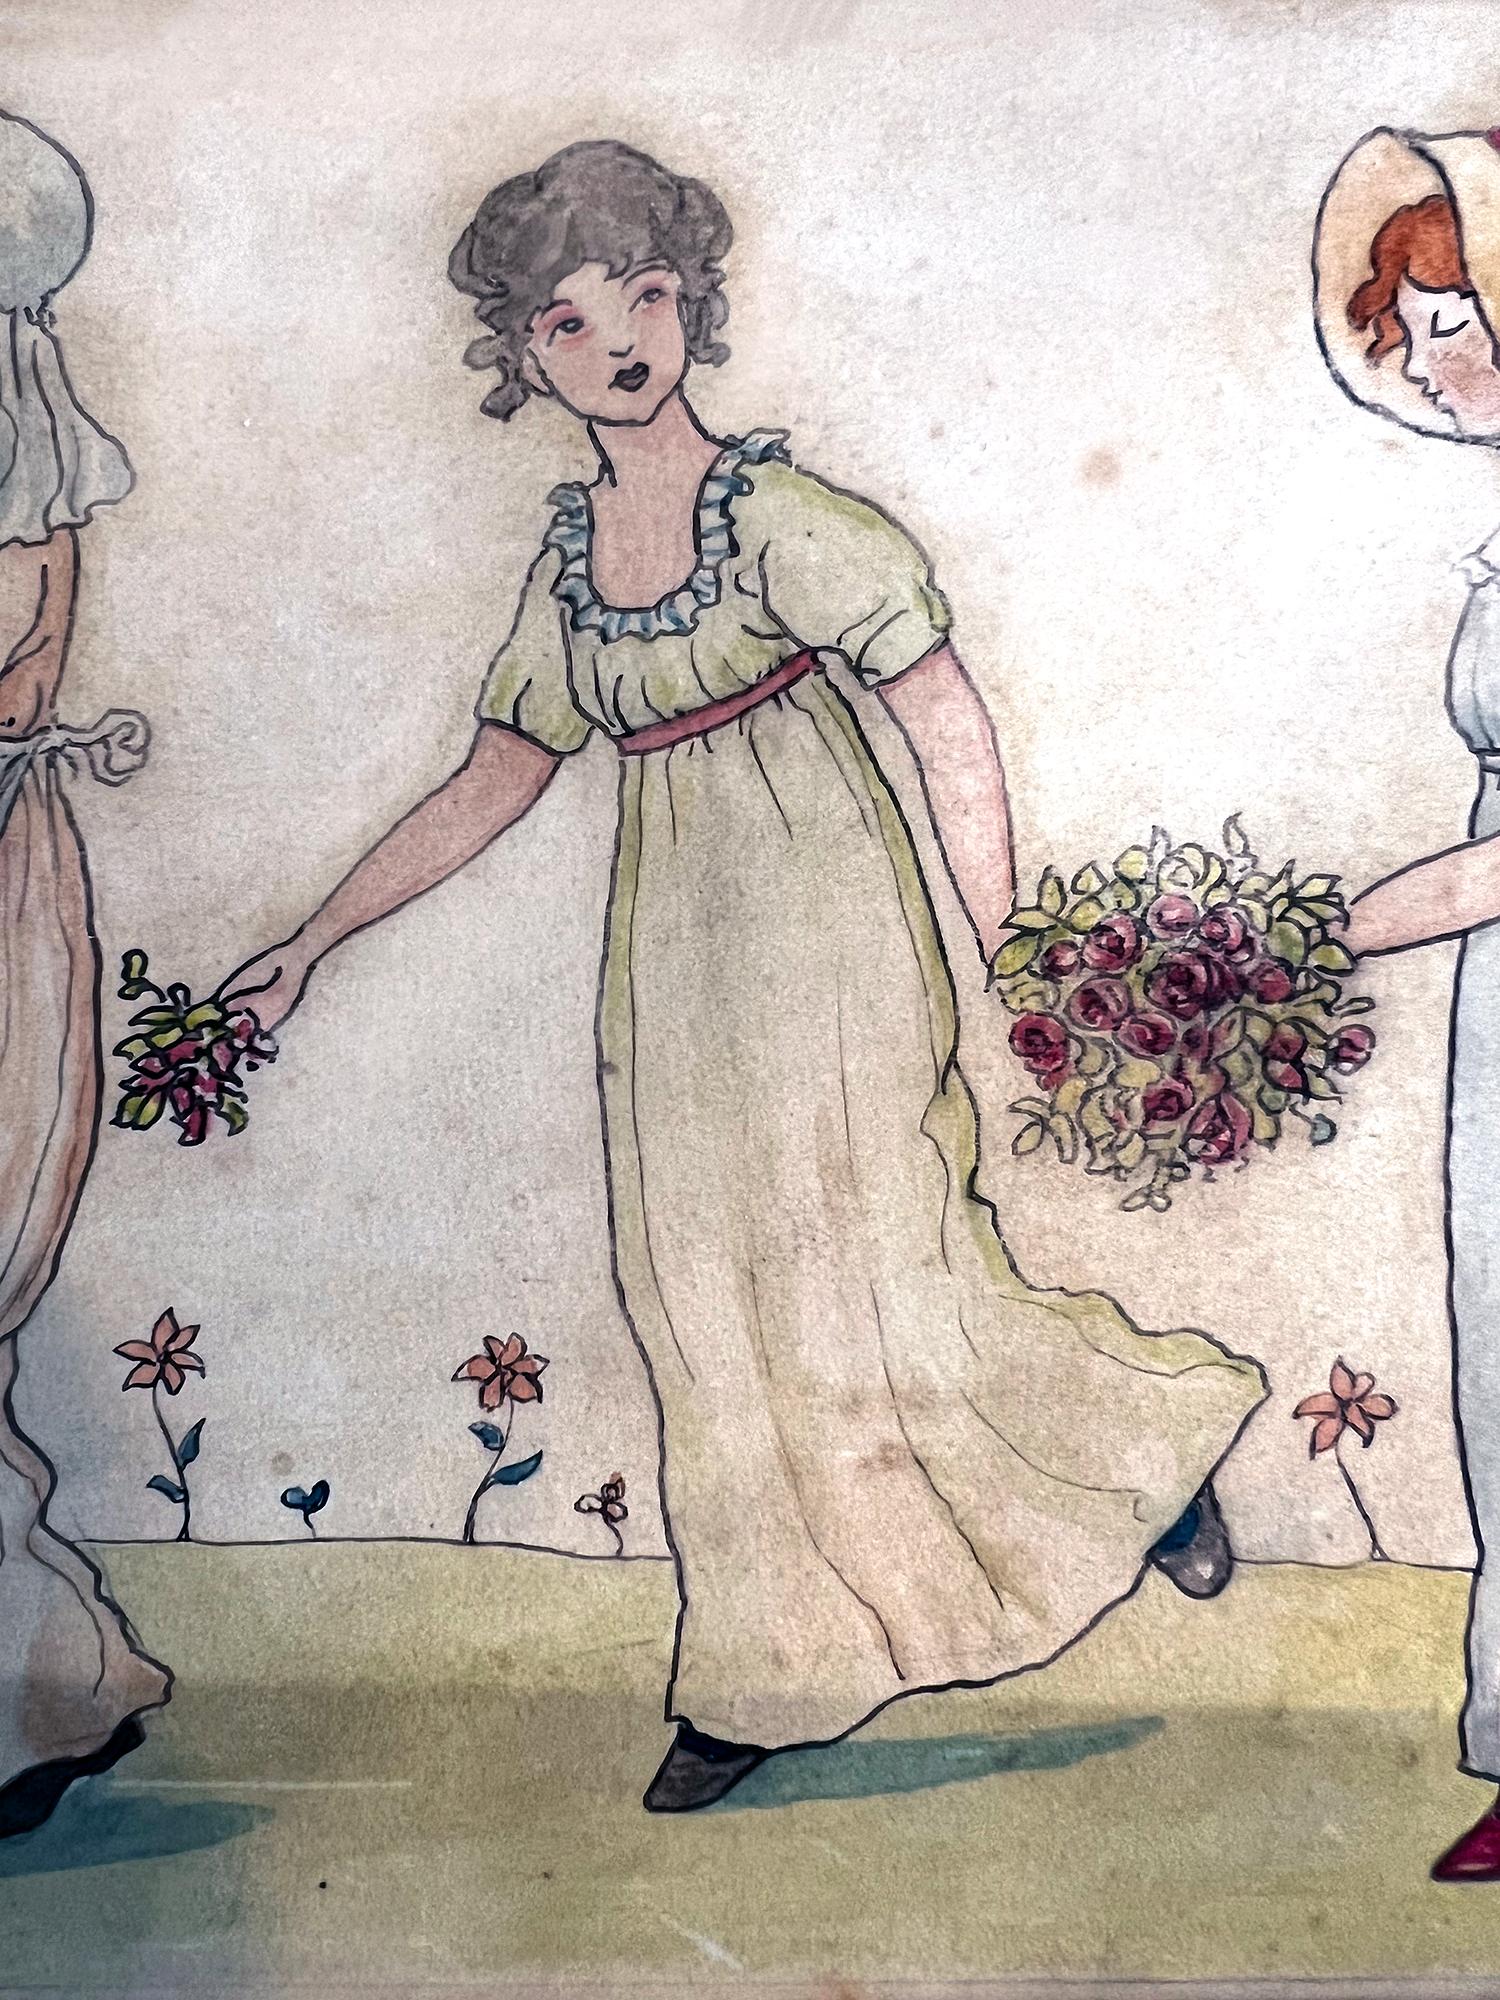 Procession Four girls with flowers - English Female Illustrator - Academic Art by kate Greenaway